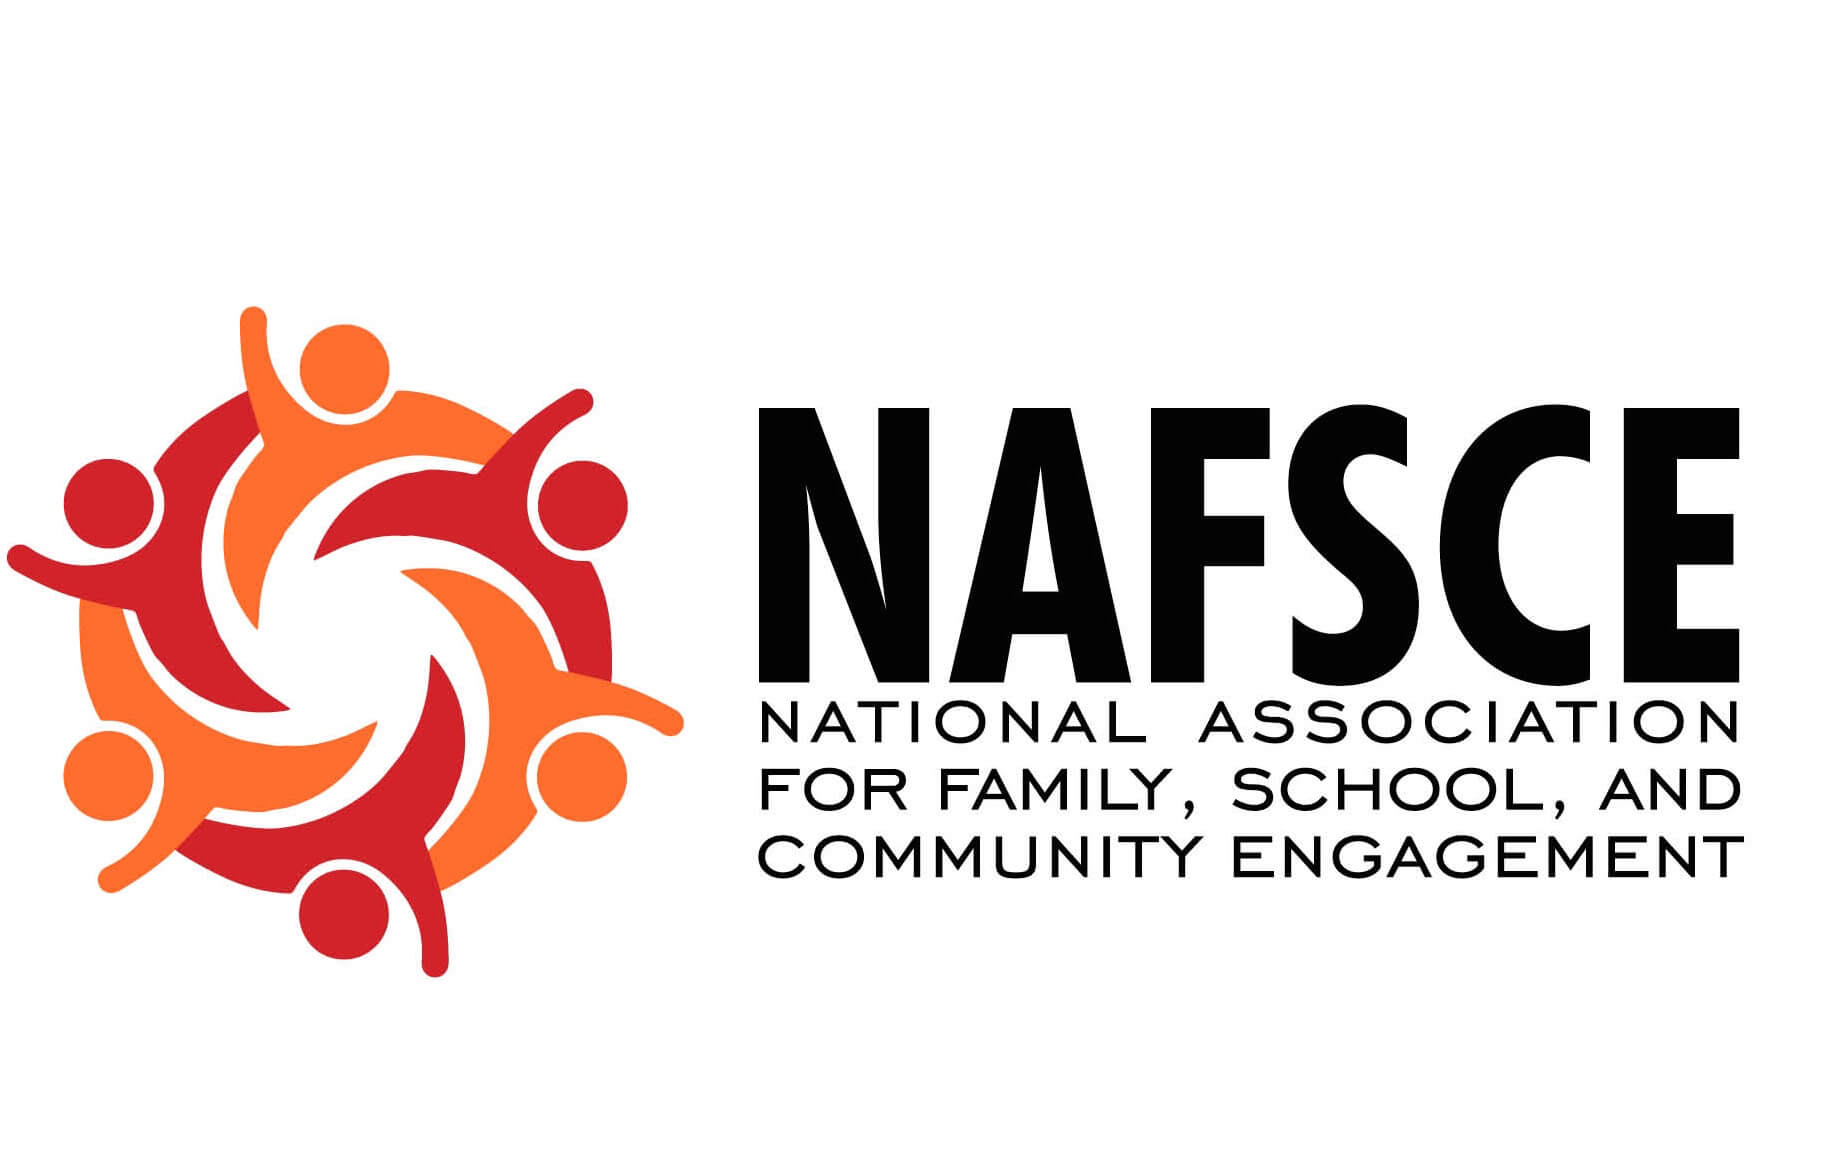 National Association for Family, School, and Community Engagement